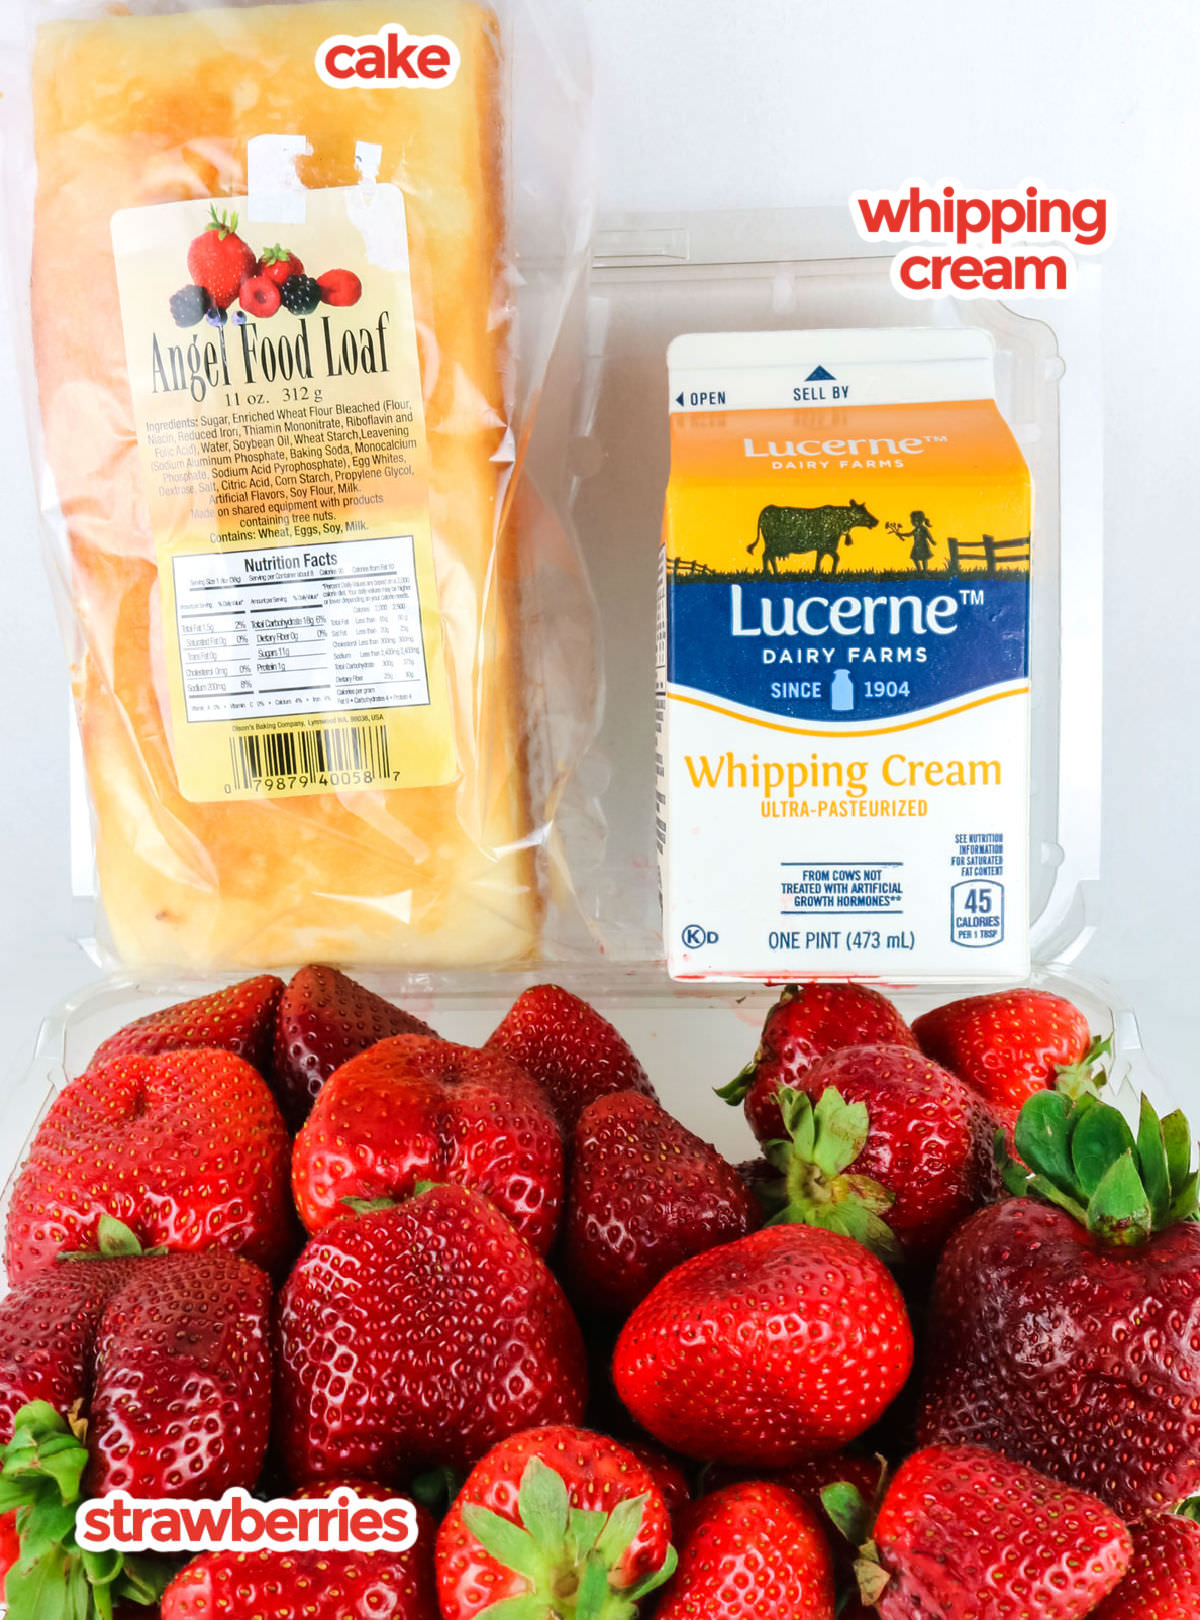 Ingredients you will need to make Red White and Blue Strawberry Shortcake including fresh strawberries, angel food cake and whipping cream.